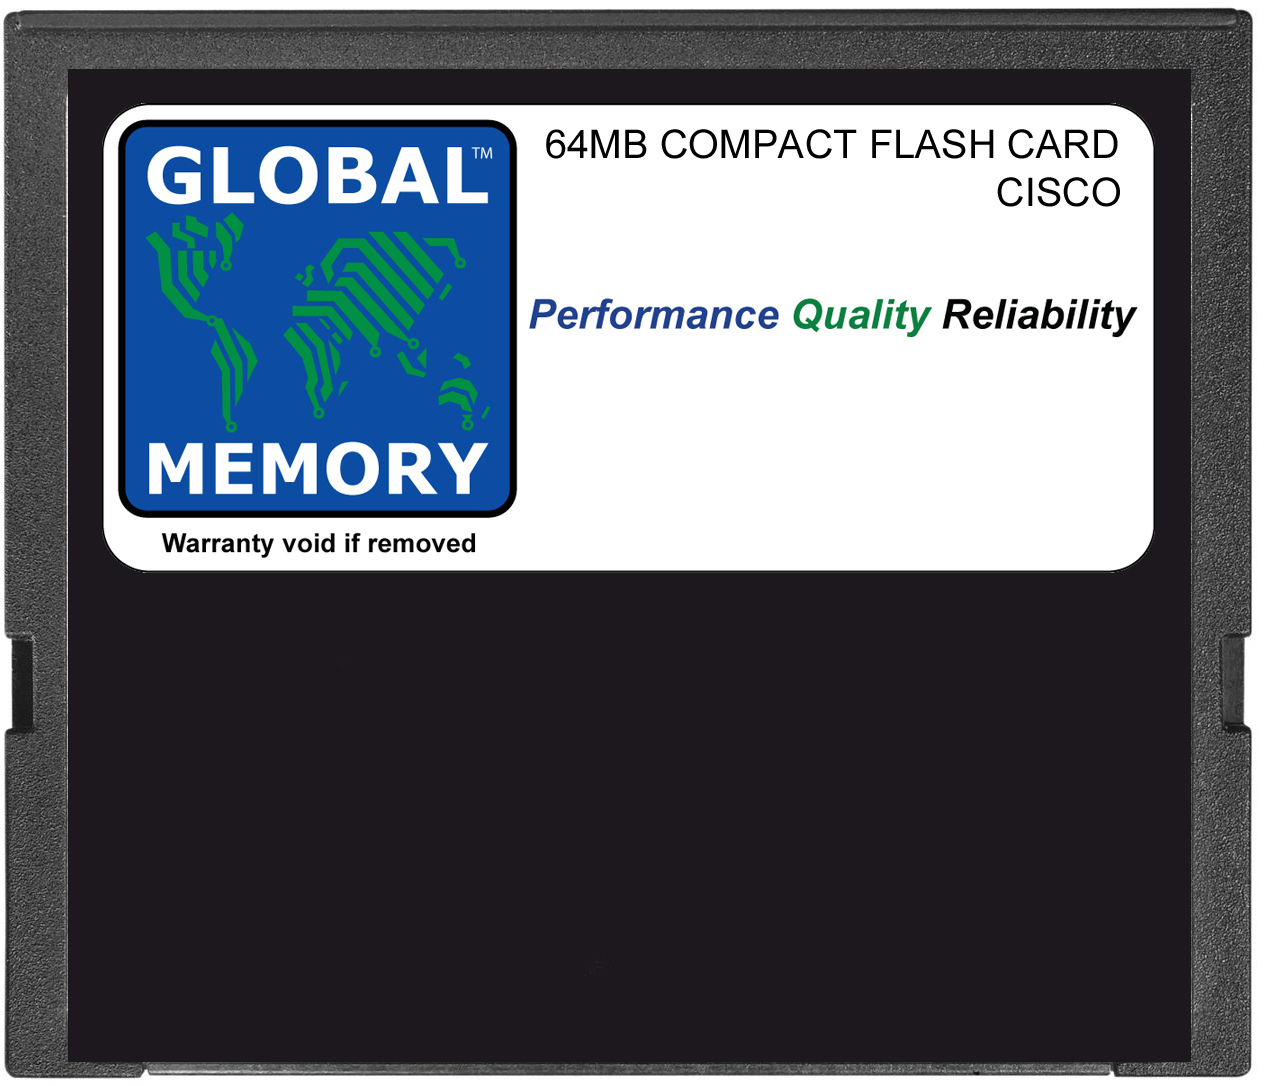 64MB COMPACT FLASH CARD MEMORY FOR CISCO 7304 ROUTERS NSE-100 / 7304 ROUTERS NPE-G100 (7300-I/O-CFM-64M)